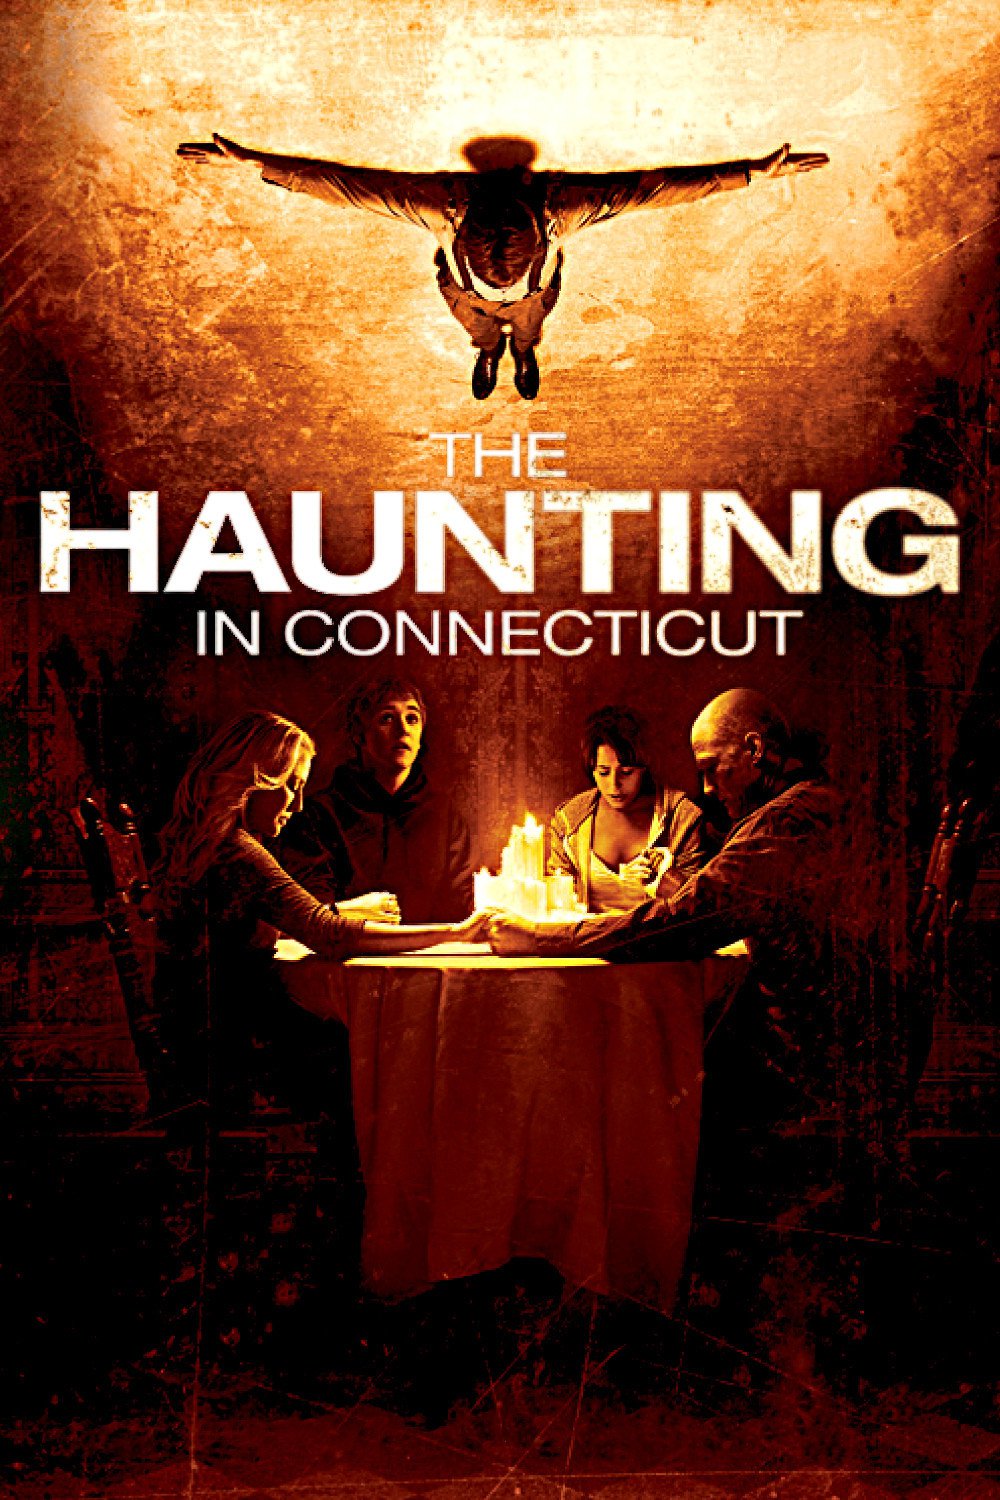 Poster for the movie "The Haunting in Connecticut"